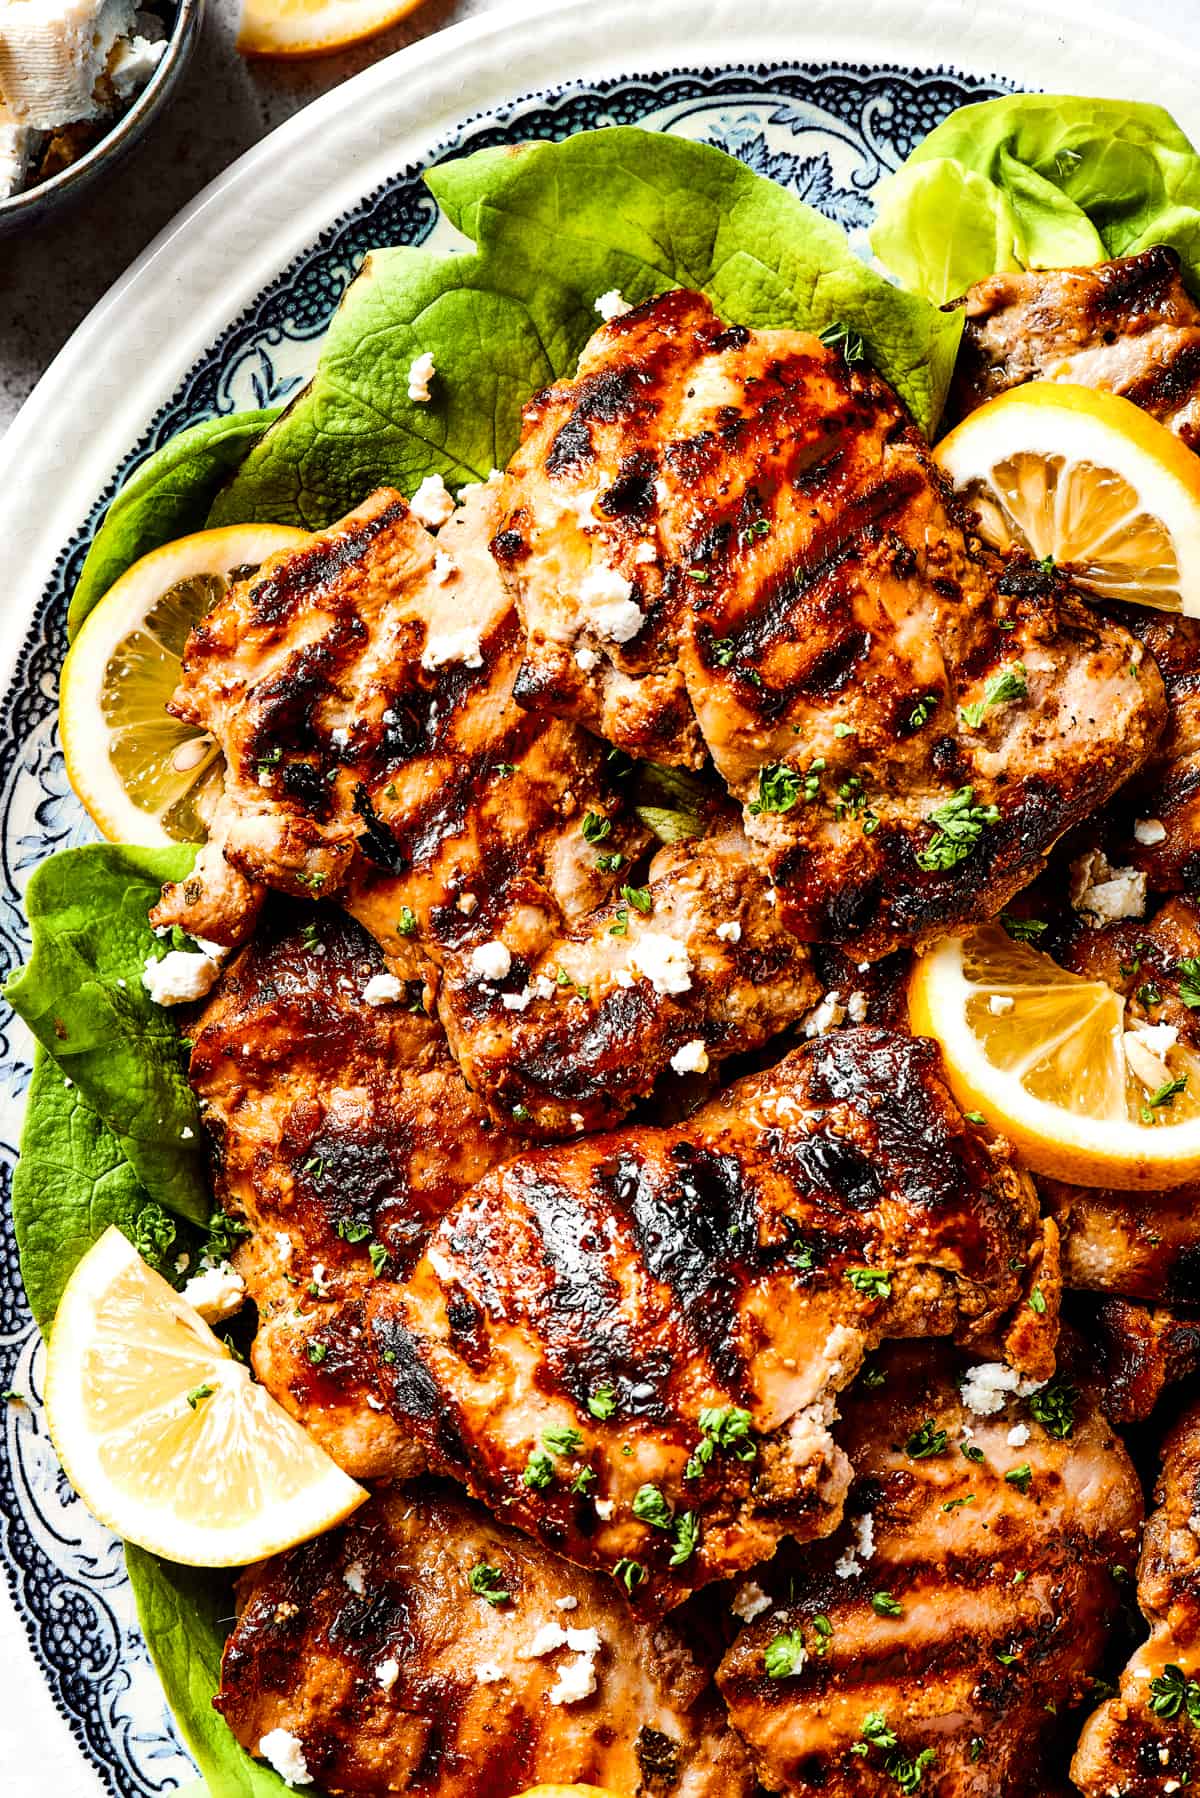 A platter of yogurt-marinated chicken with grill marks.